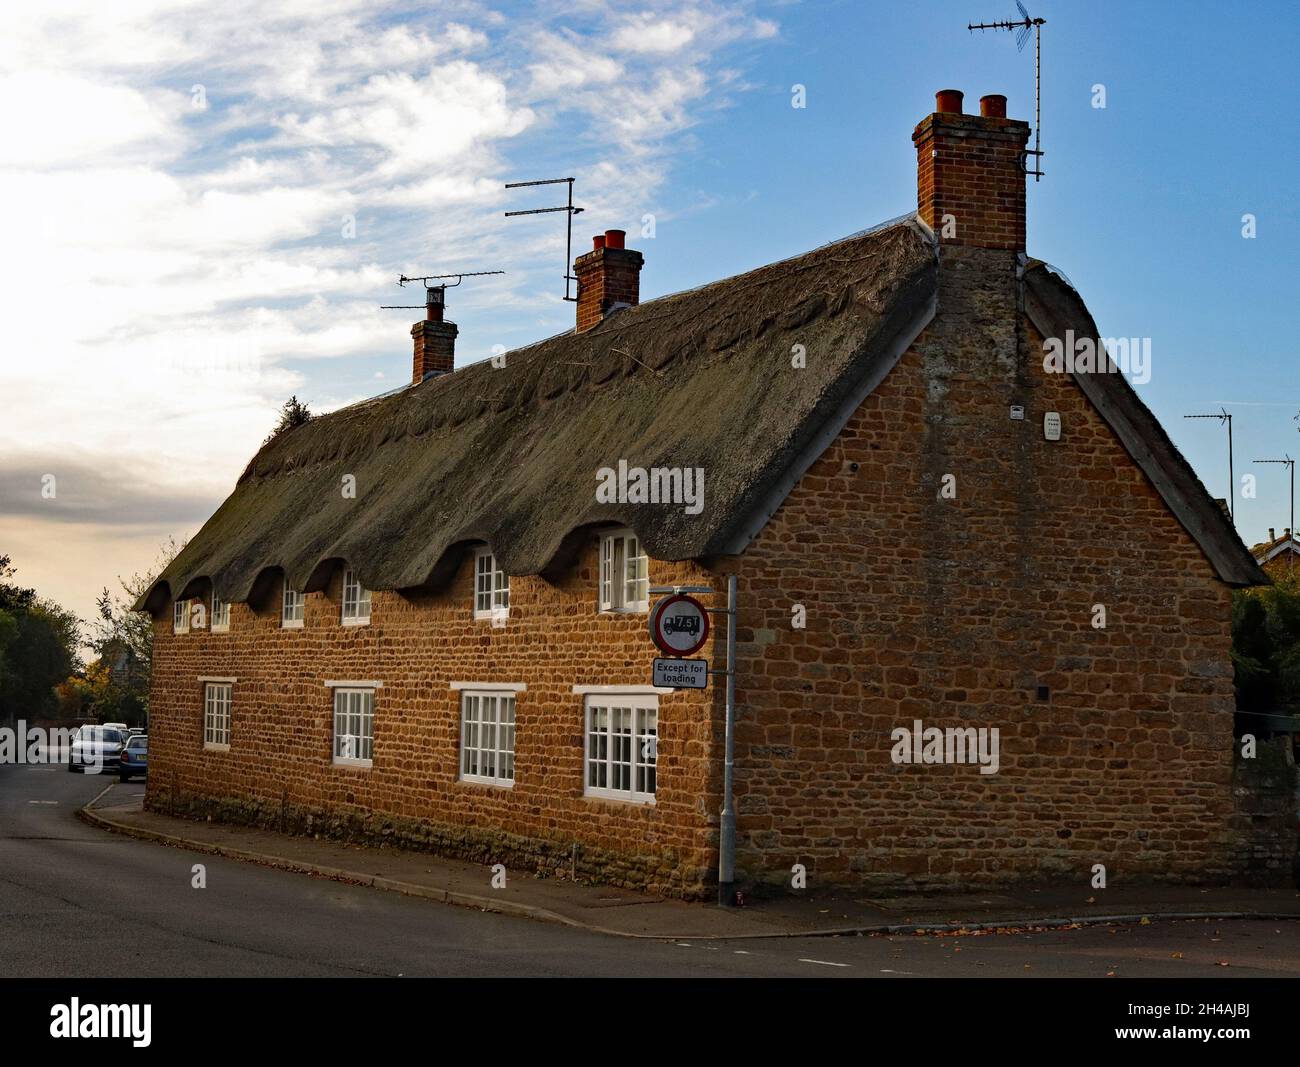 Thatched cottages on the High Street in Ecton, the Northamptonshire ironstone building stones are warmed by the morning sun. Stock Photo